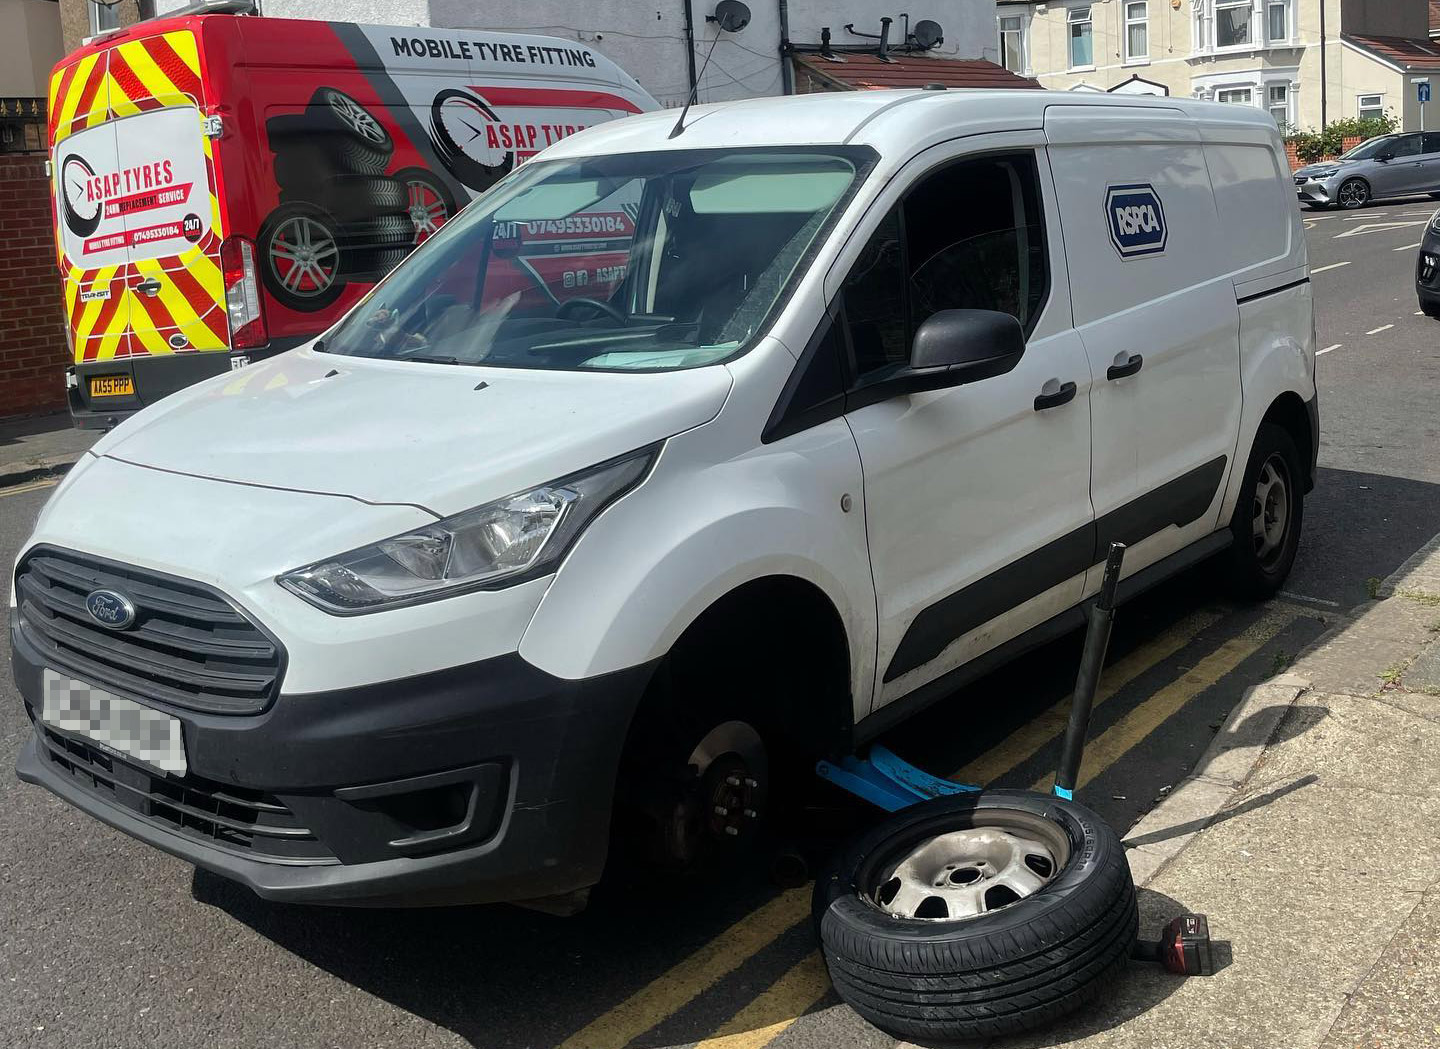 Mobile Tyre Fitters Finsbury